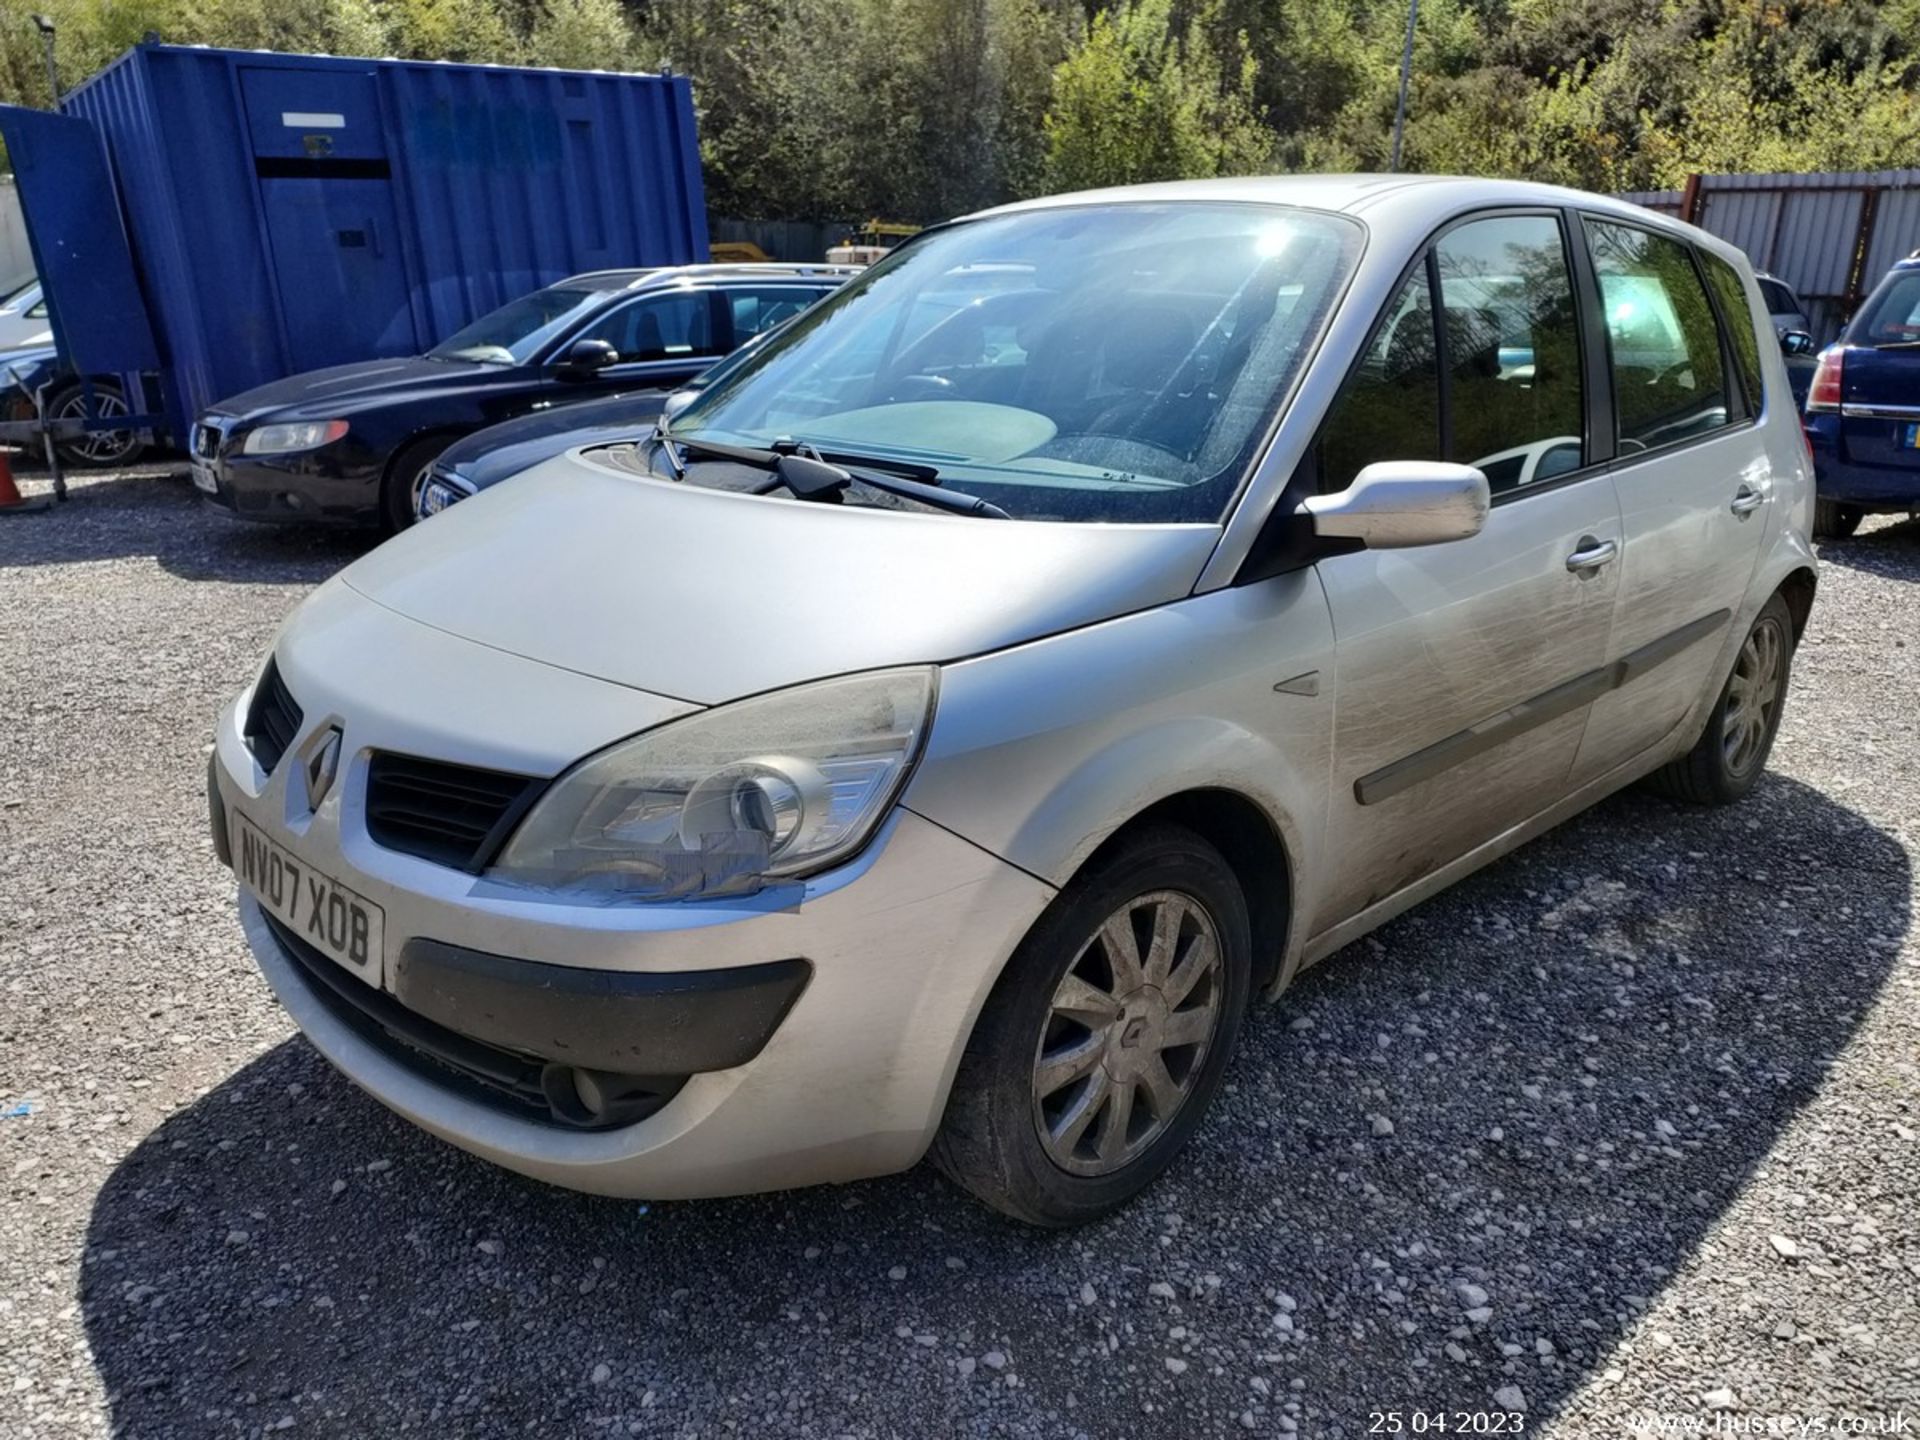 07/07 RENAULT SCENIC DYN VVT - 1598cc 5dr MPV (Silver) - Image 10 of 34